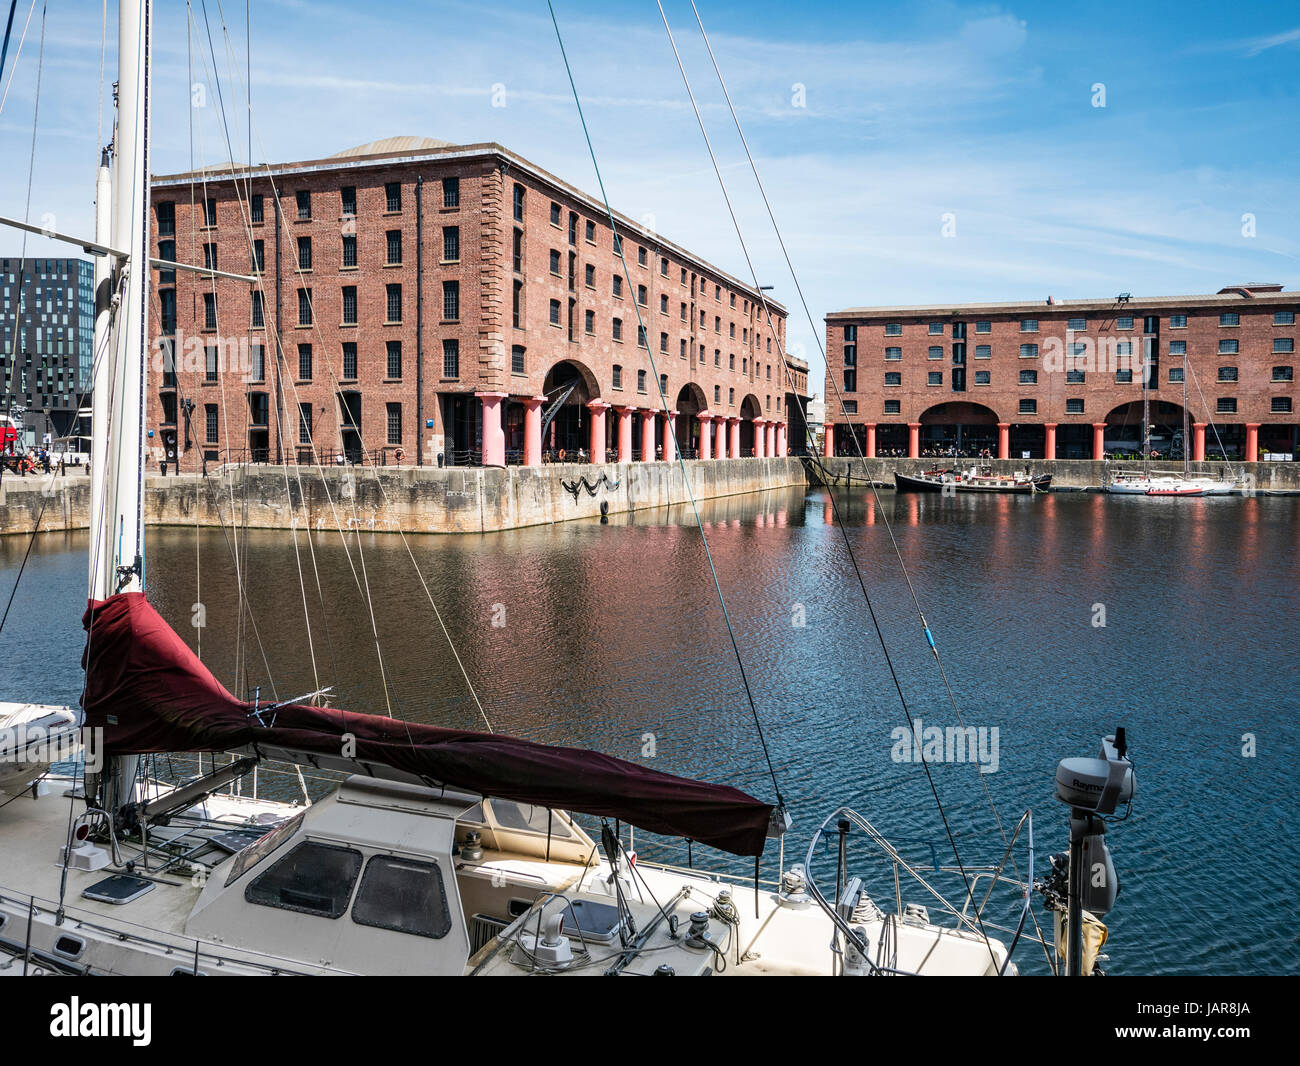 The Albert Dock complex of dock buildings and warehouses was opened in 1846, in Liverpool, England. Designed by Jesse Hartley and Philip Hardwick Stock Photo